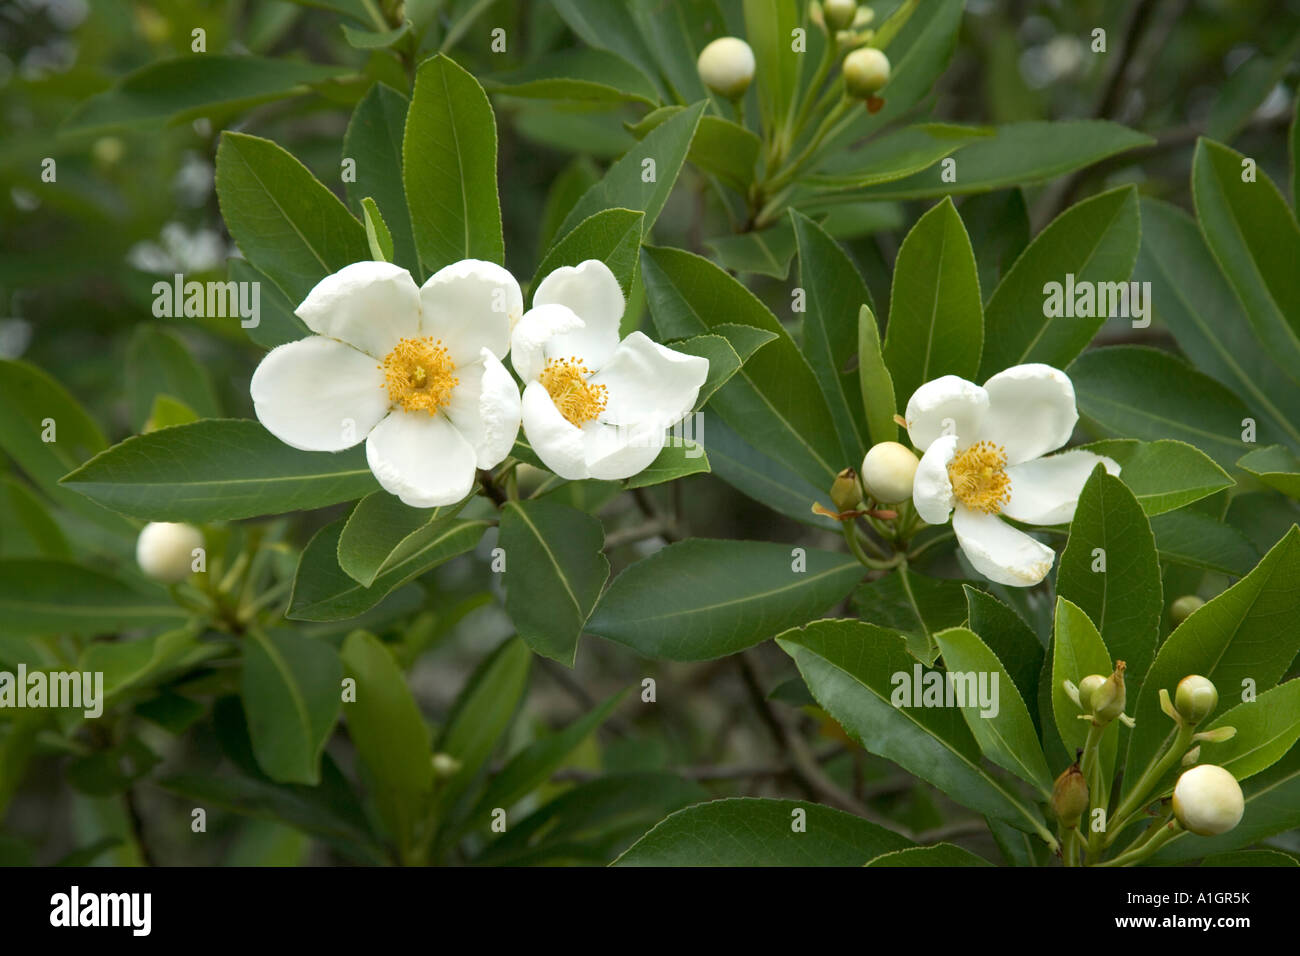 Flowers of the Loblolly Bay tree. Stock Photo